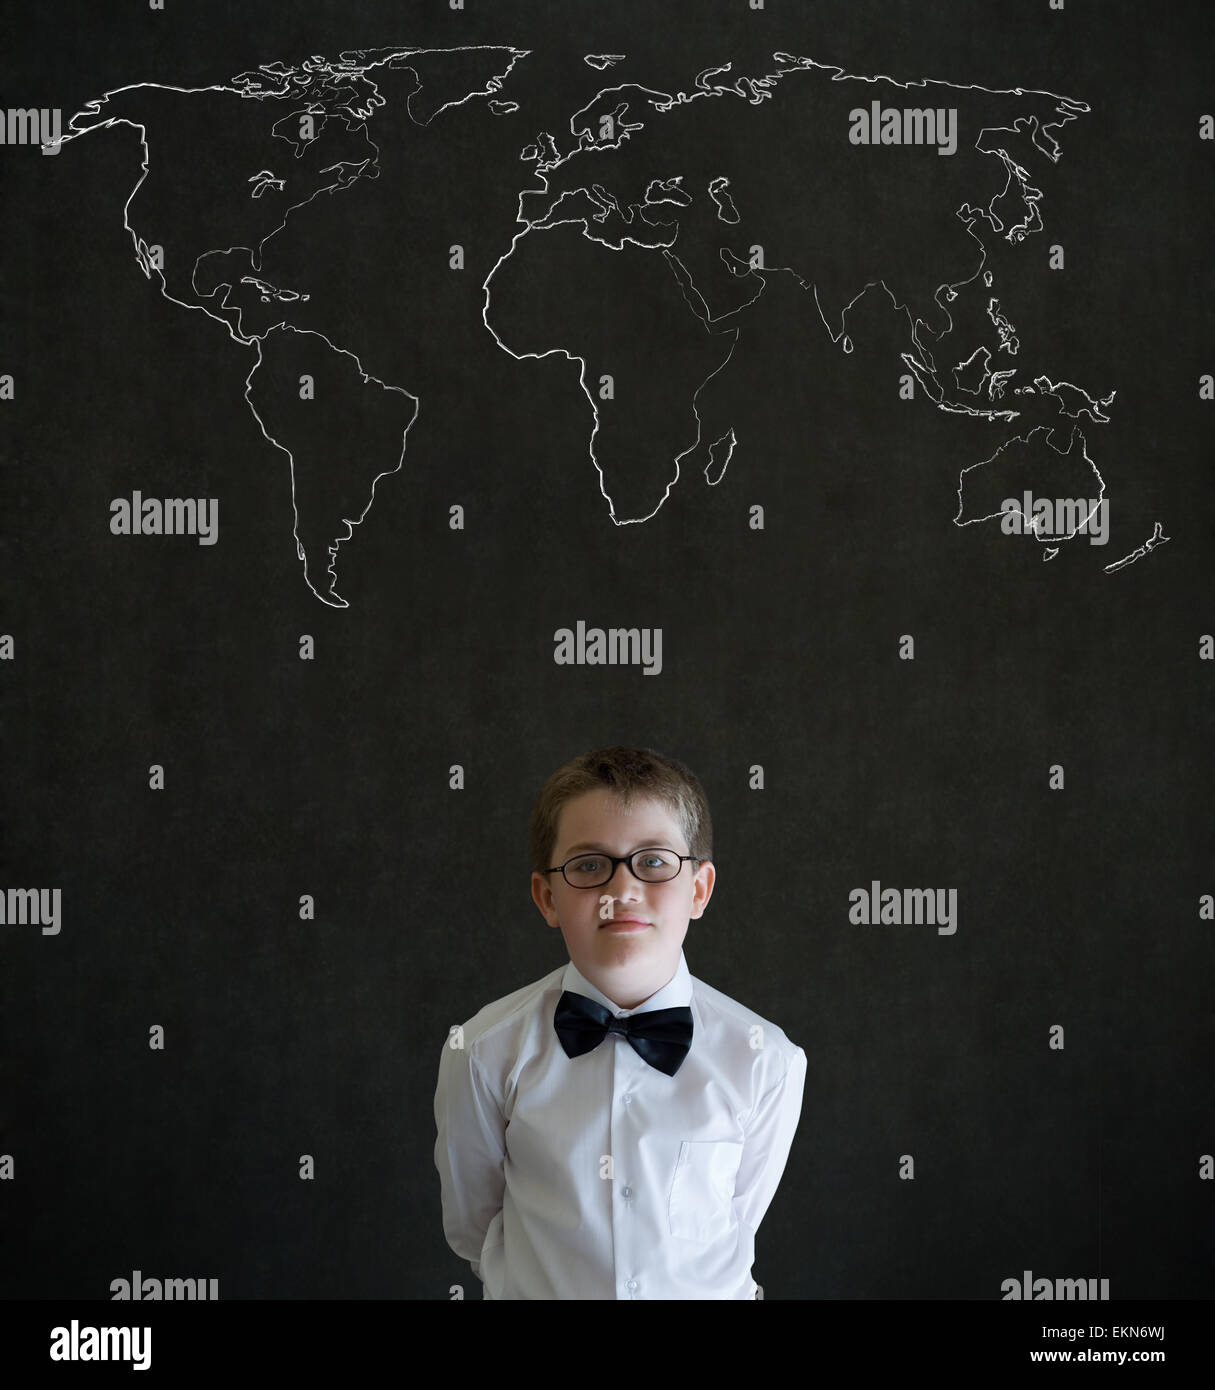 Thinking boy business man with chalk geography world map Stock Photo